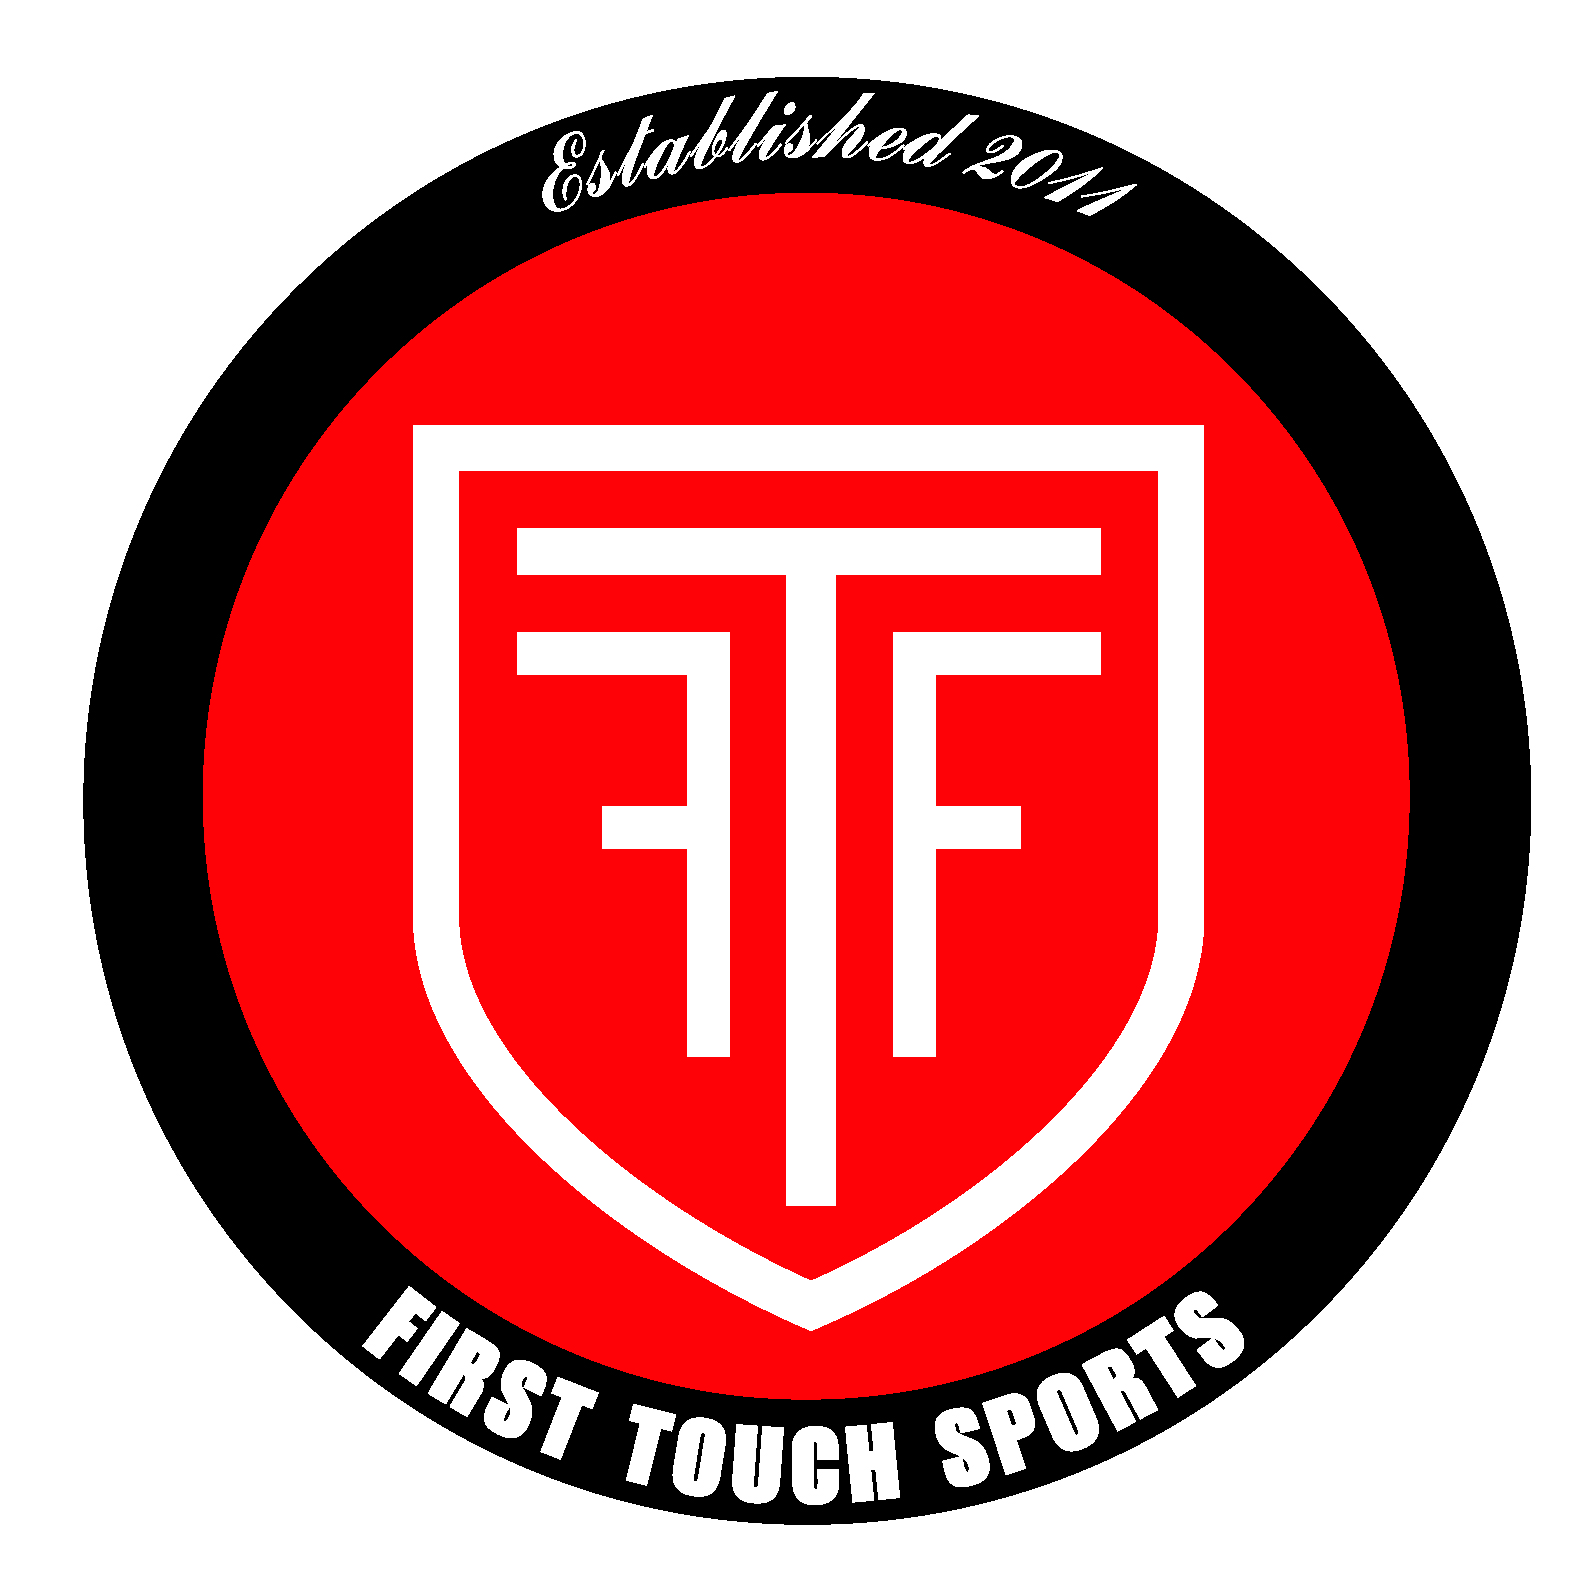 First Touch Sports